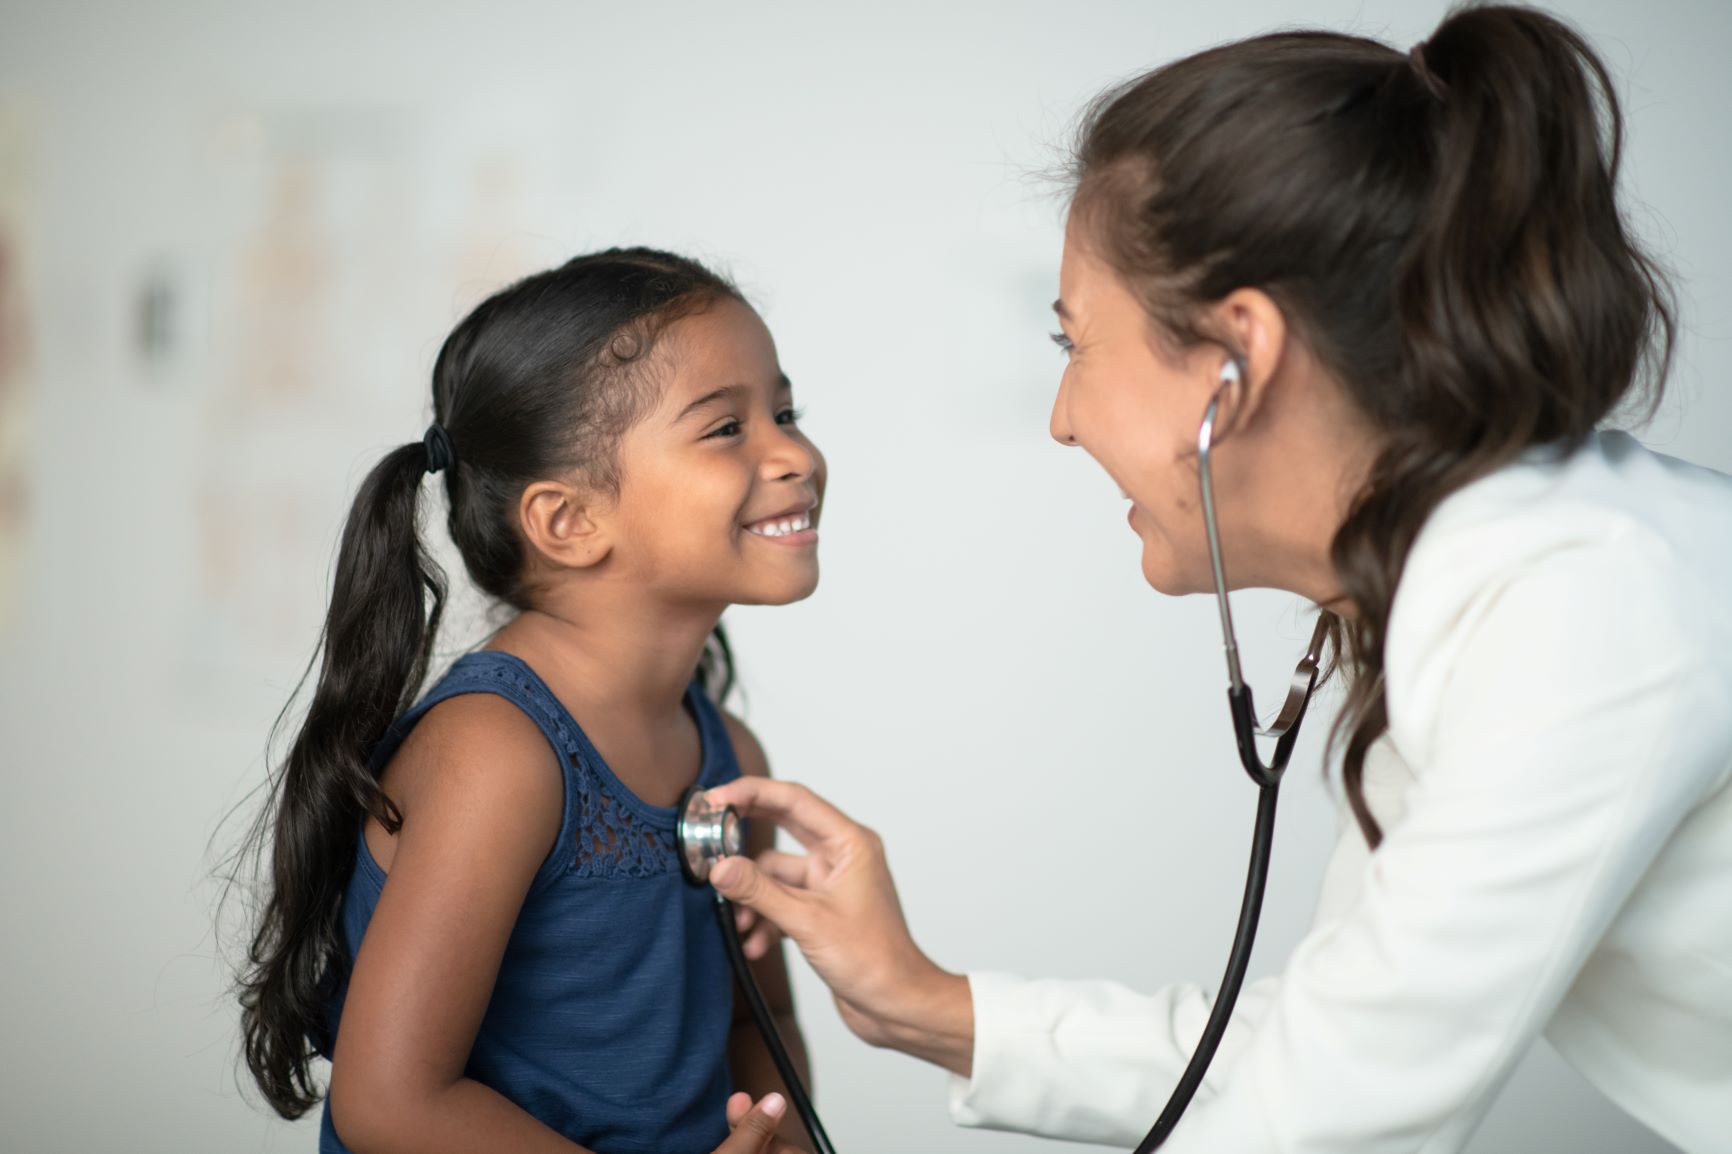 A beautiful little Hispanic girl sits in front of her doctor while at a routine check up. She has a big smile on her face and is dressed casually as she looks up at the doctor. The doctor is leaning in close and listening to her heart beat with her stethoscope.